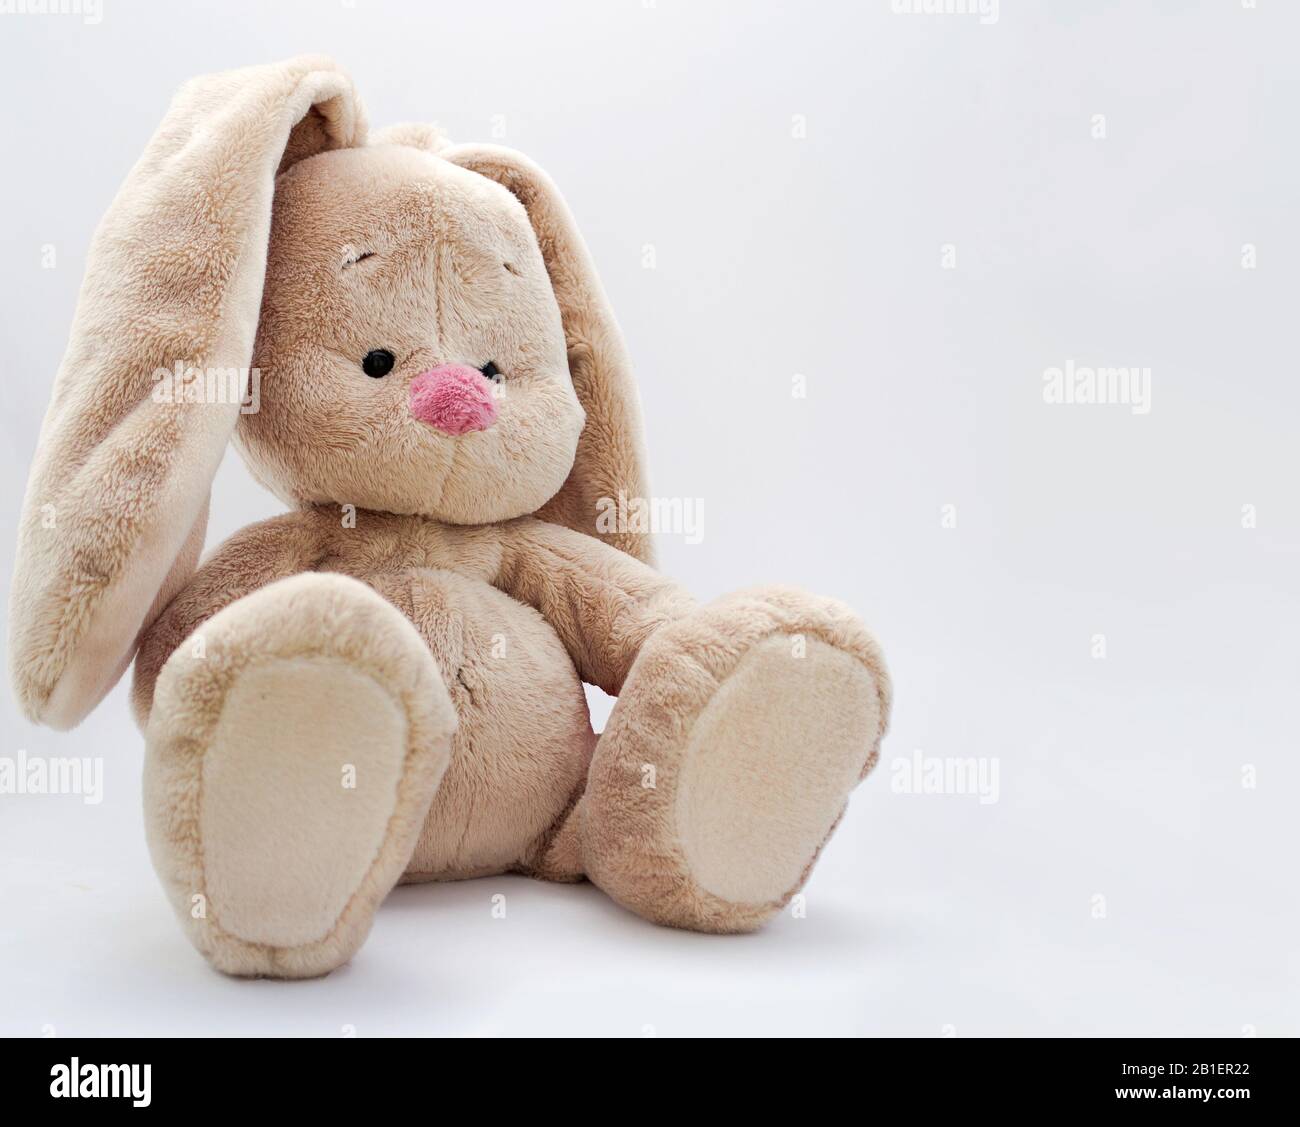 a cute baby soft toy bunny sitting on a bright background Stock Photo